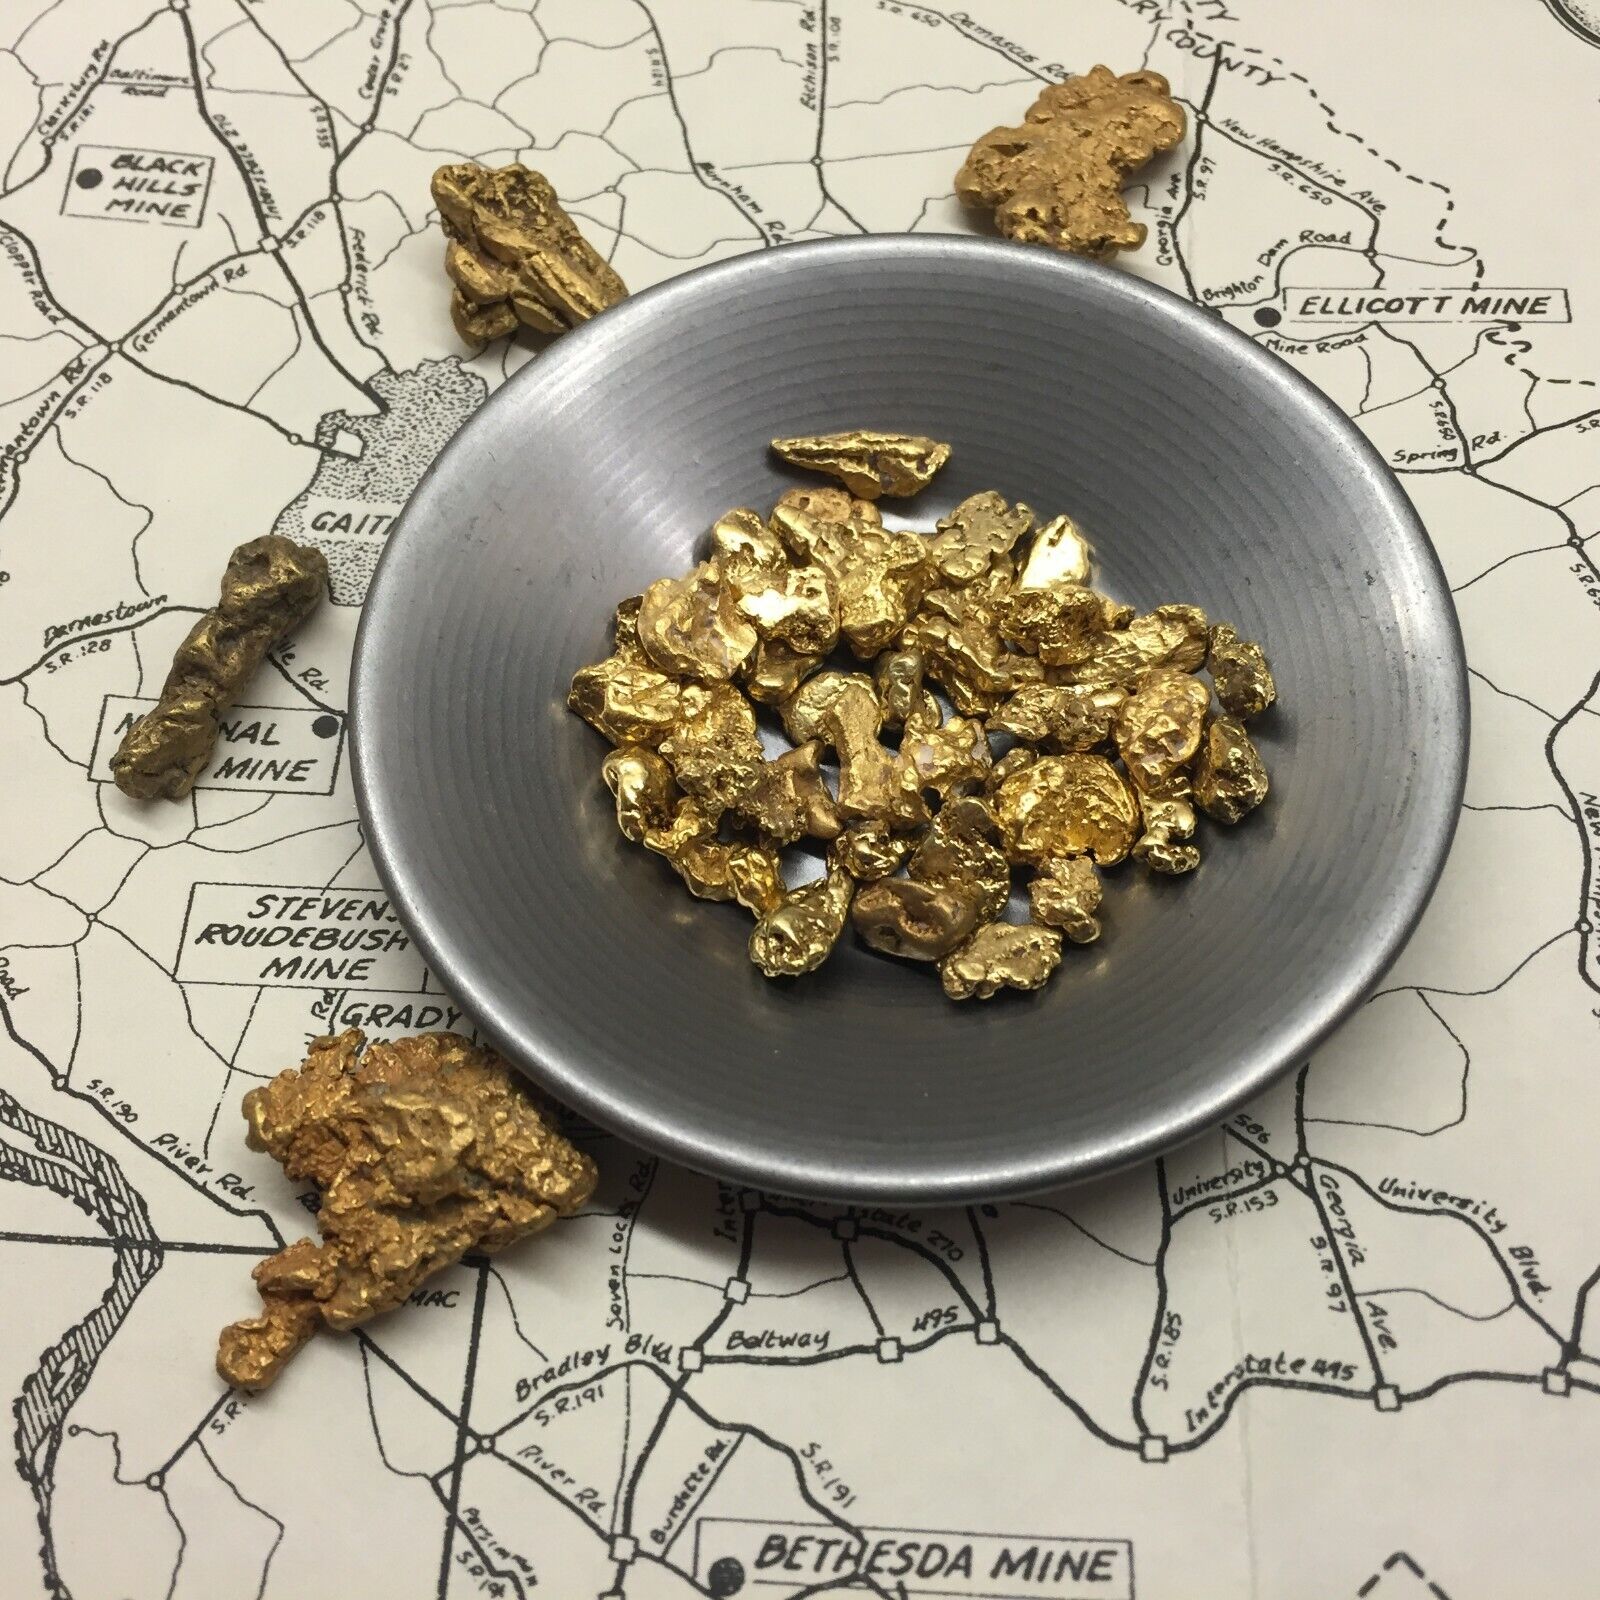 Lost Treasure Panning Paydirt - Find the Troy Ounce of Gold Nuggets